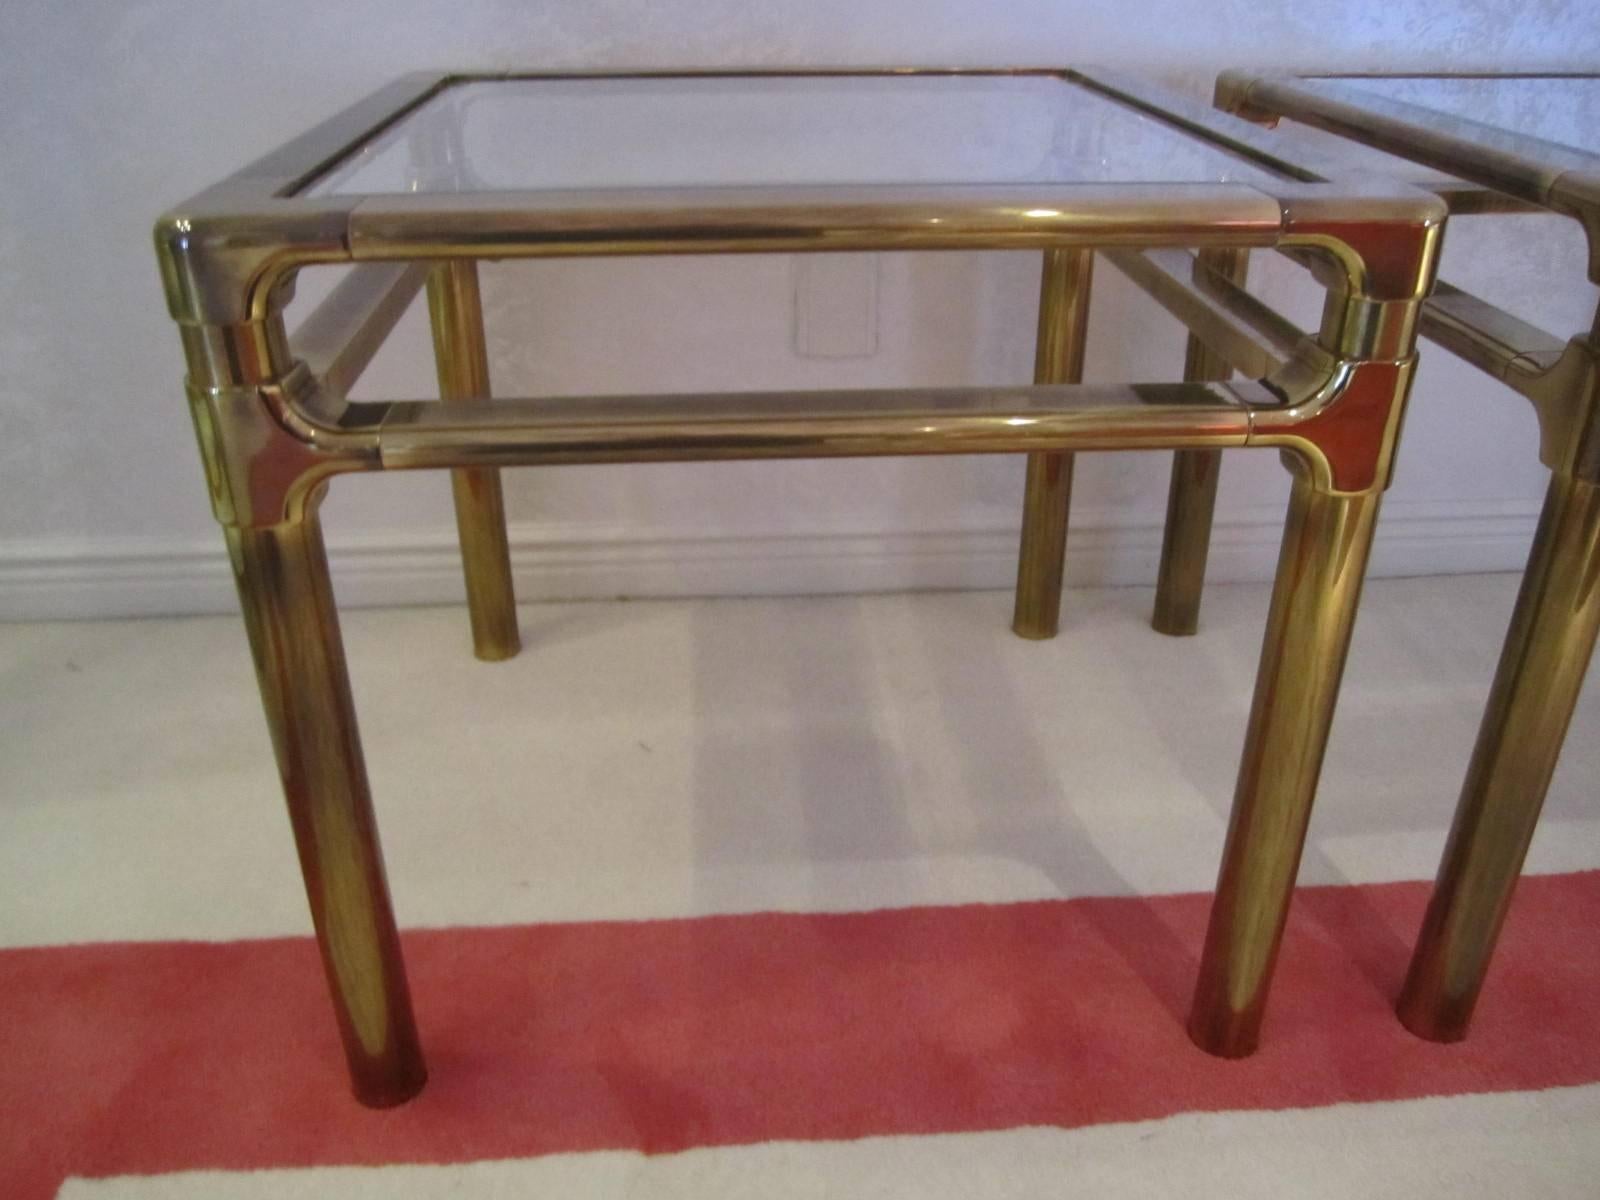 Lovely pair of Mastercraft Asian style thick brass side tables. These tables are in nice vintage condition and have acquired a perfect antiqued brass look. There are 2 small dings to one of the tables-not distracting.